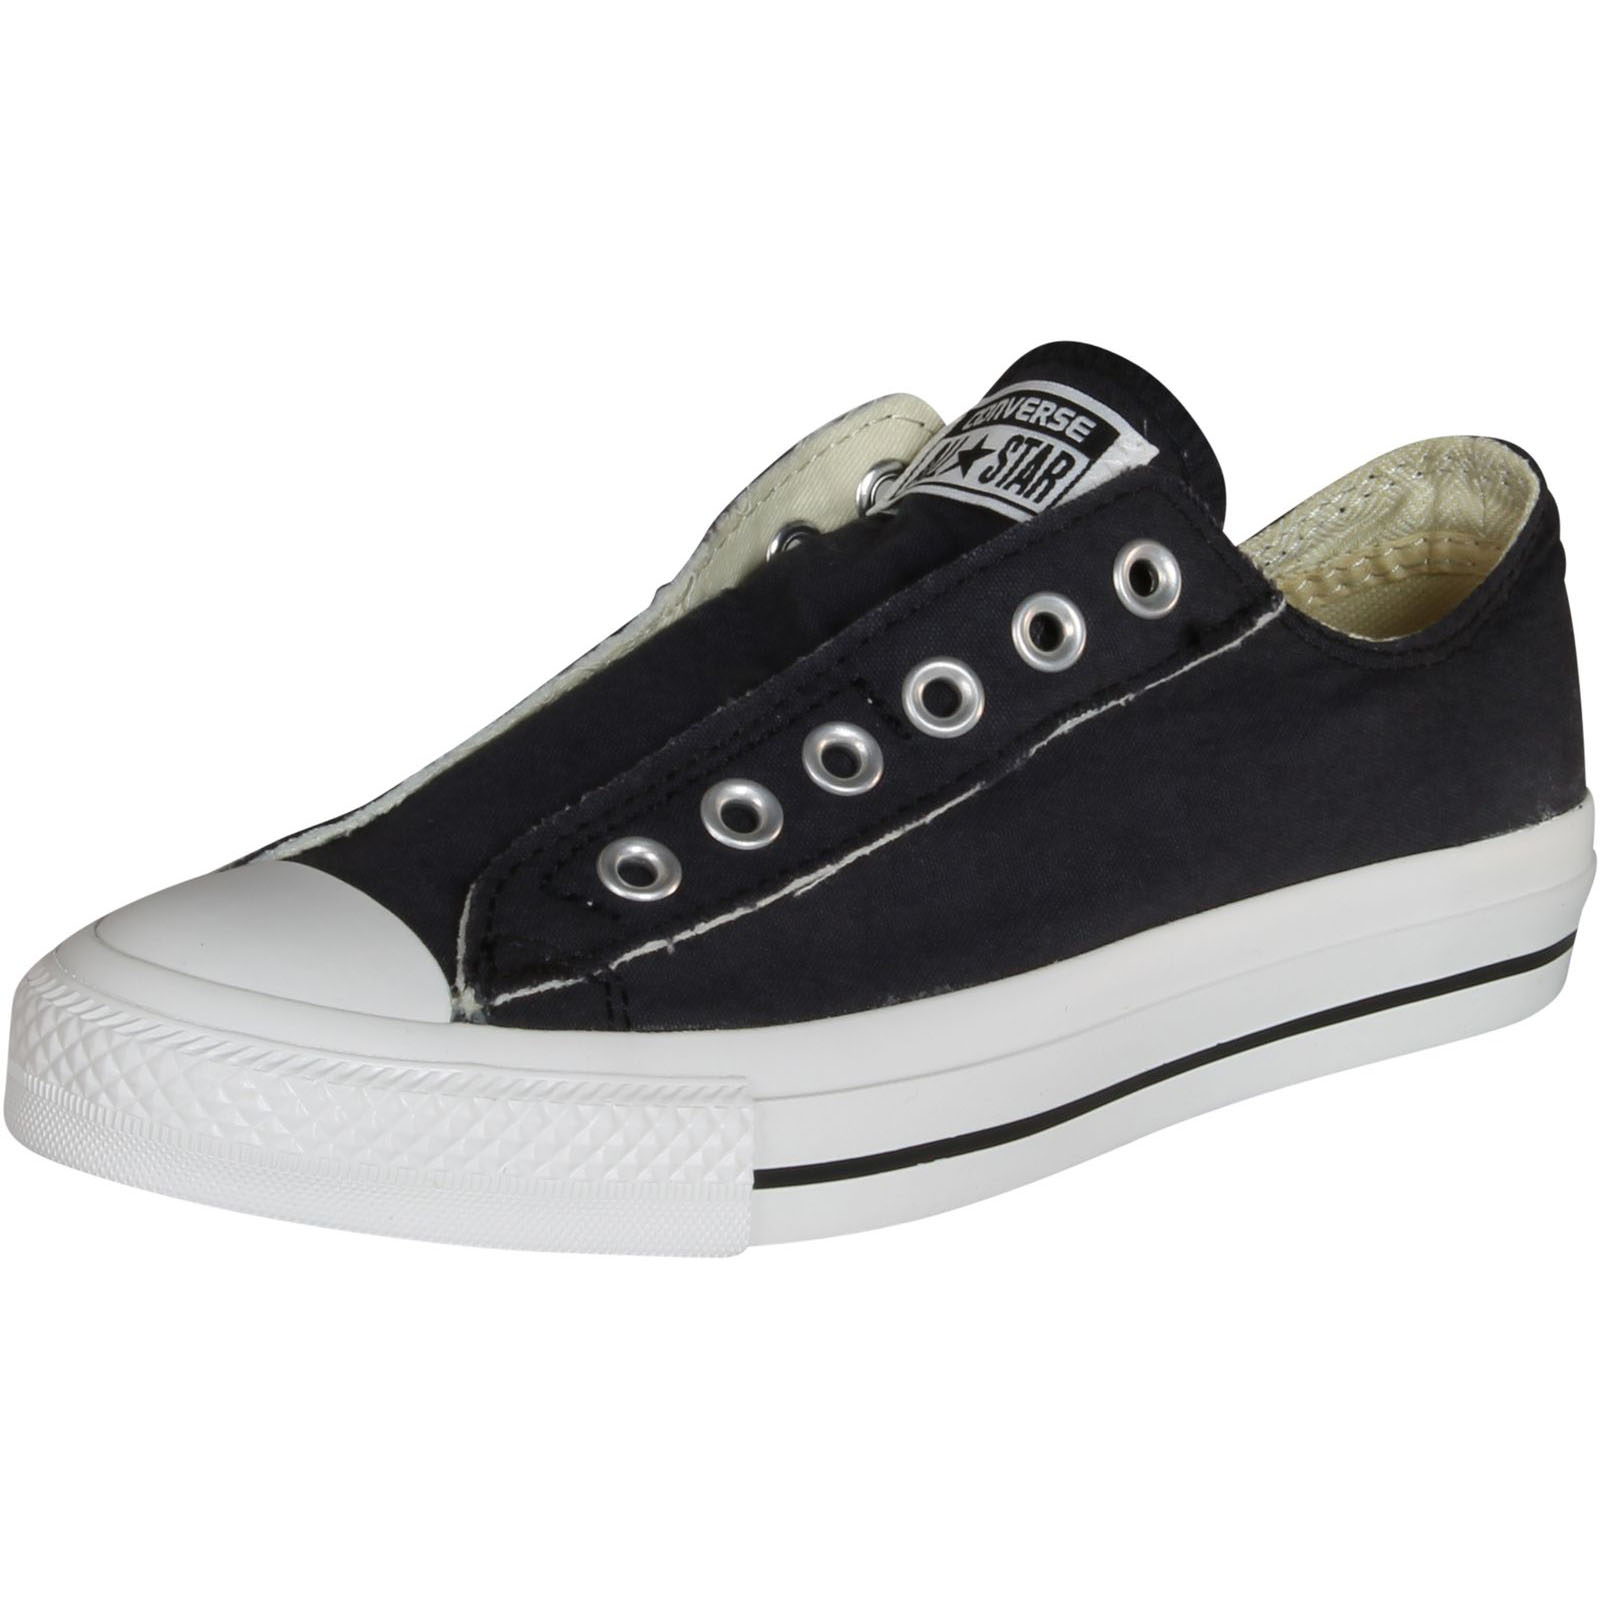 Converse Slip On Chuck Taylor - image 1 of 4